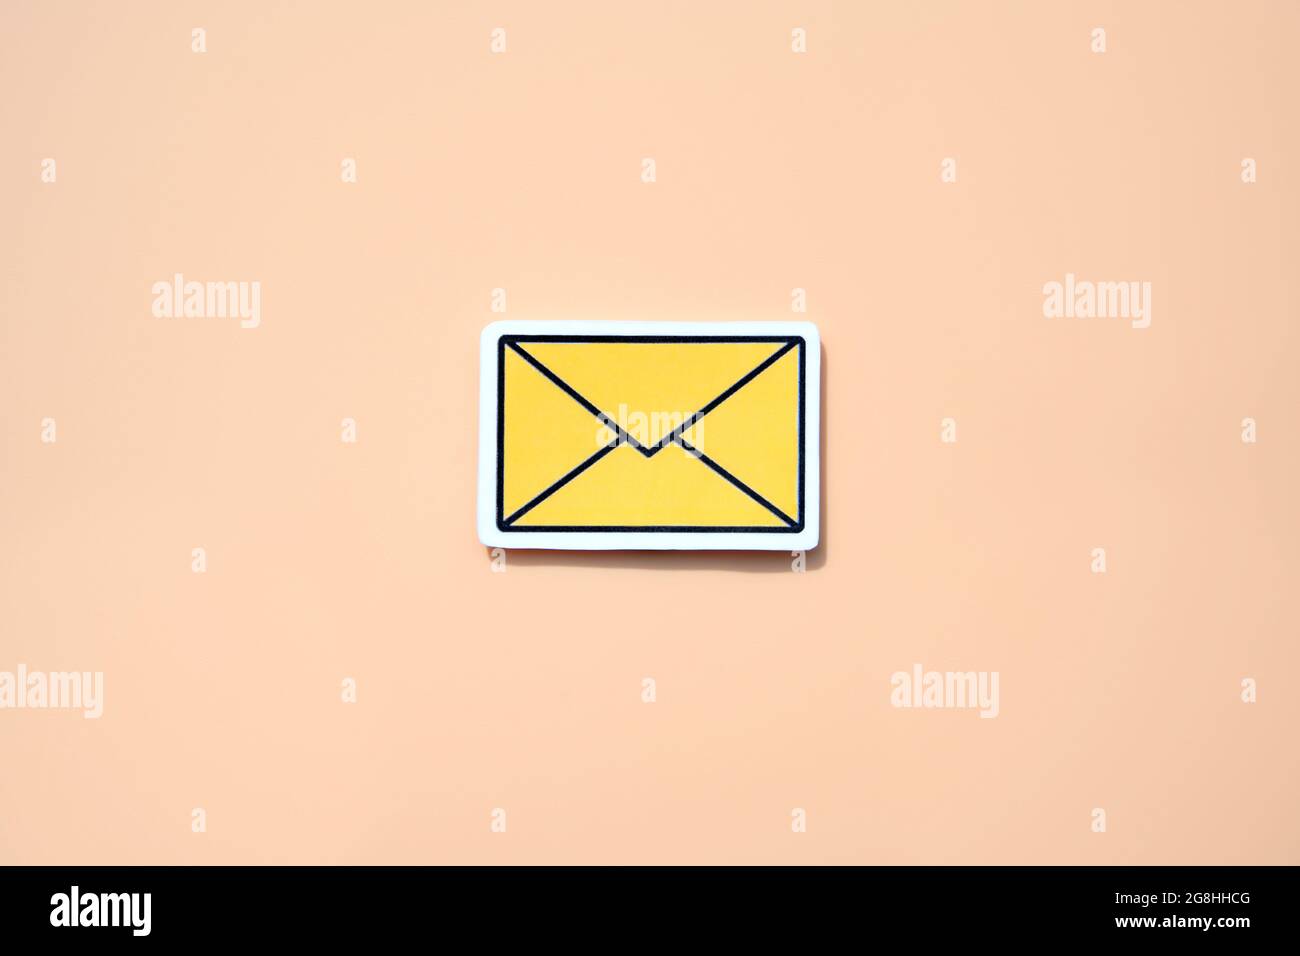 Yellow message sign or envelope icon against a salmon-colored background Stock Photo